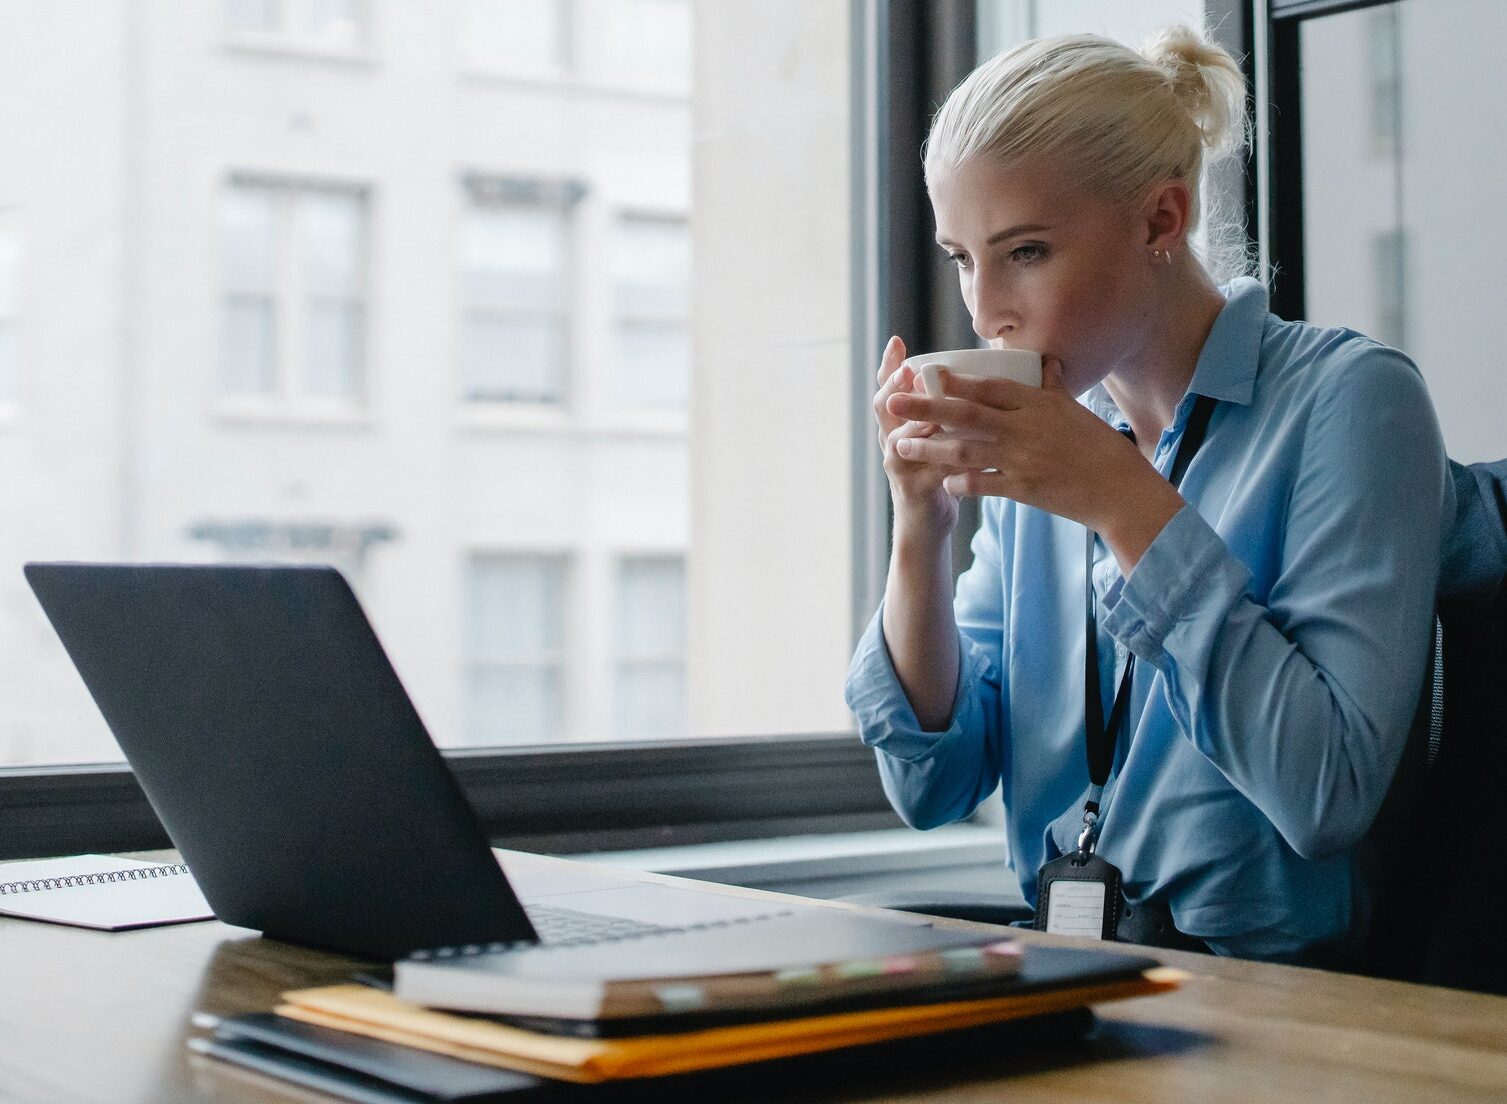 professional woman seated at desk sipping coffee while looking at laptop